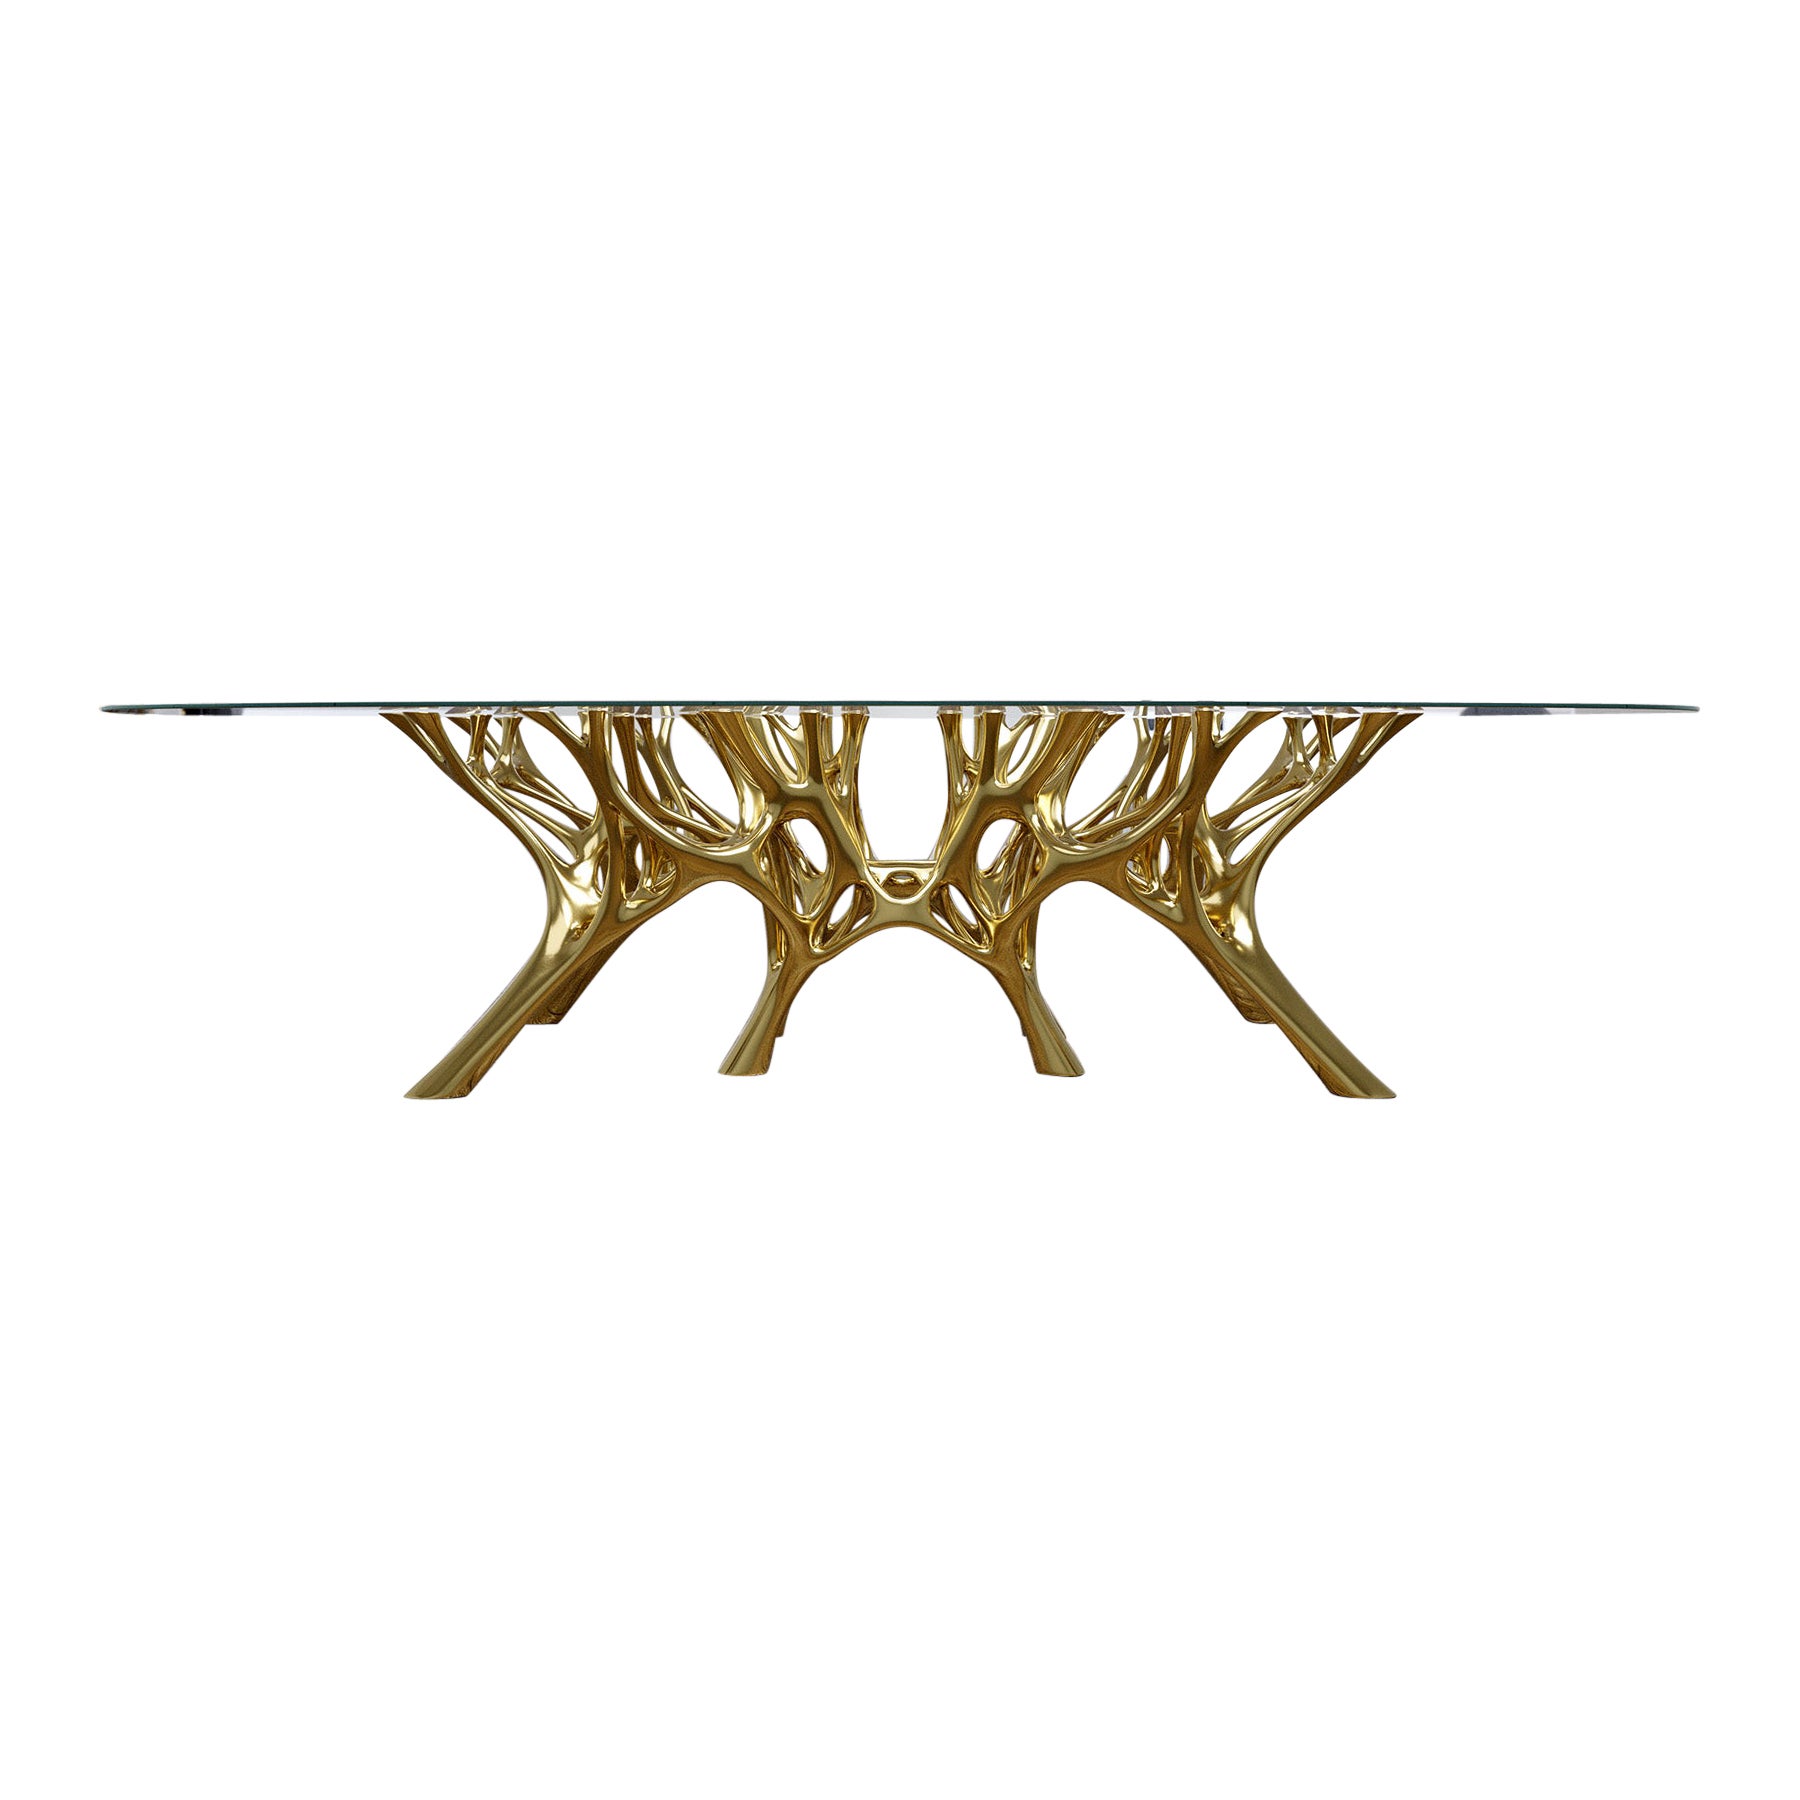 Organic AI Singularity Sculptural Metal Dining Table with Glass Top For Sale